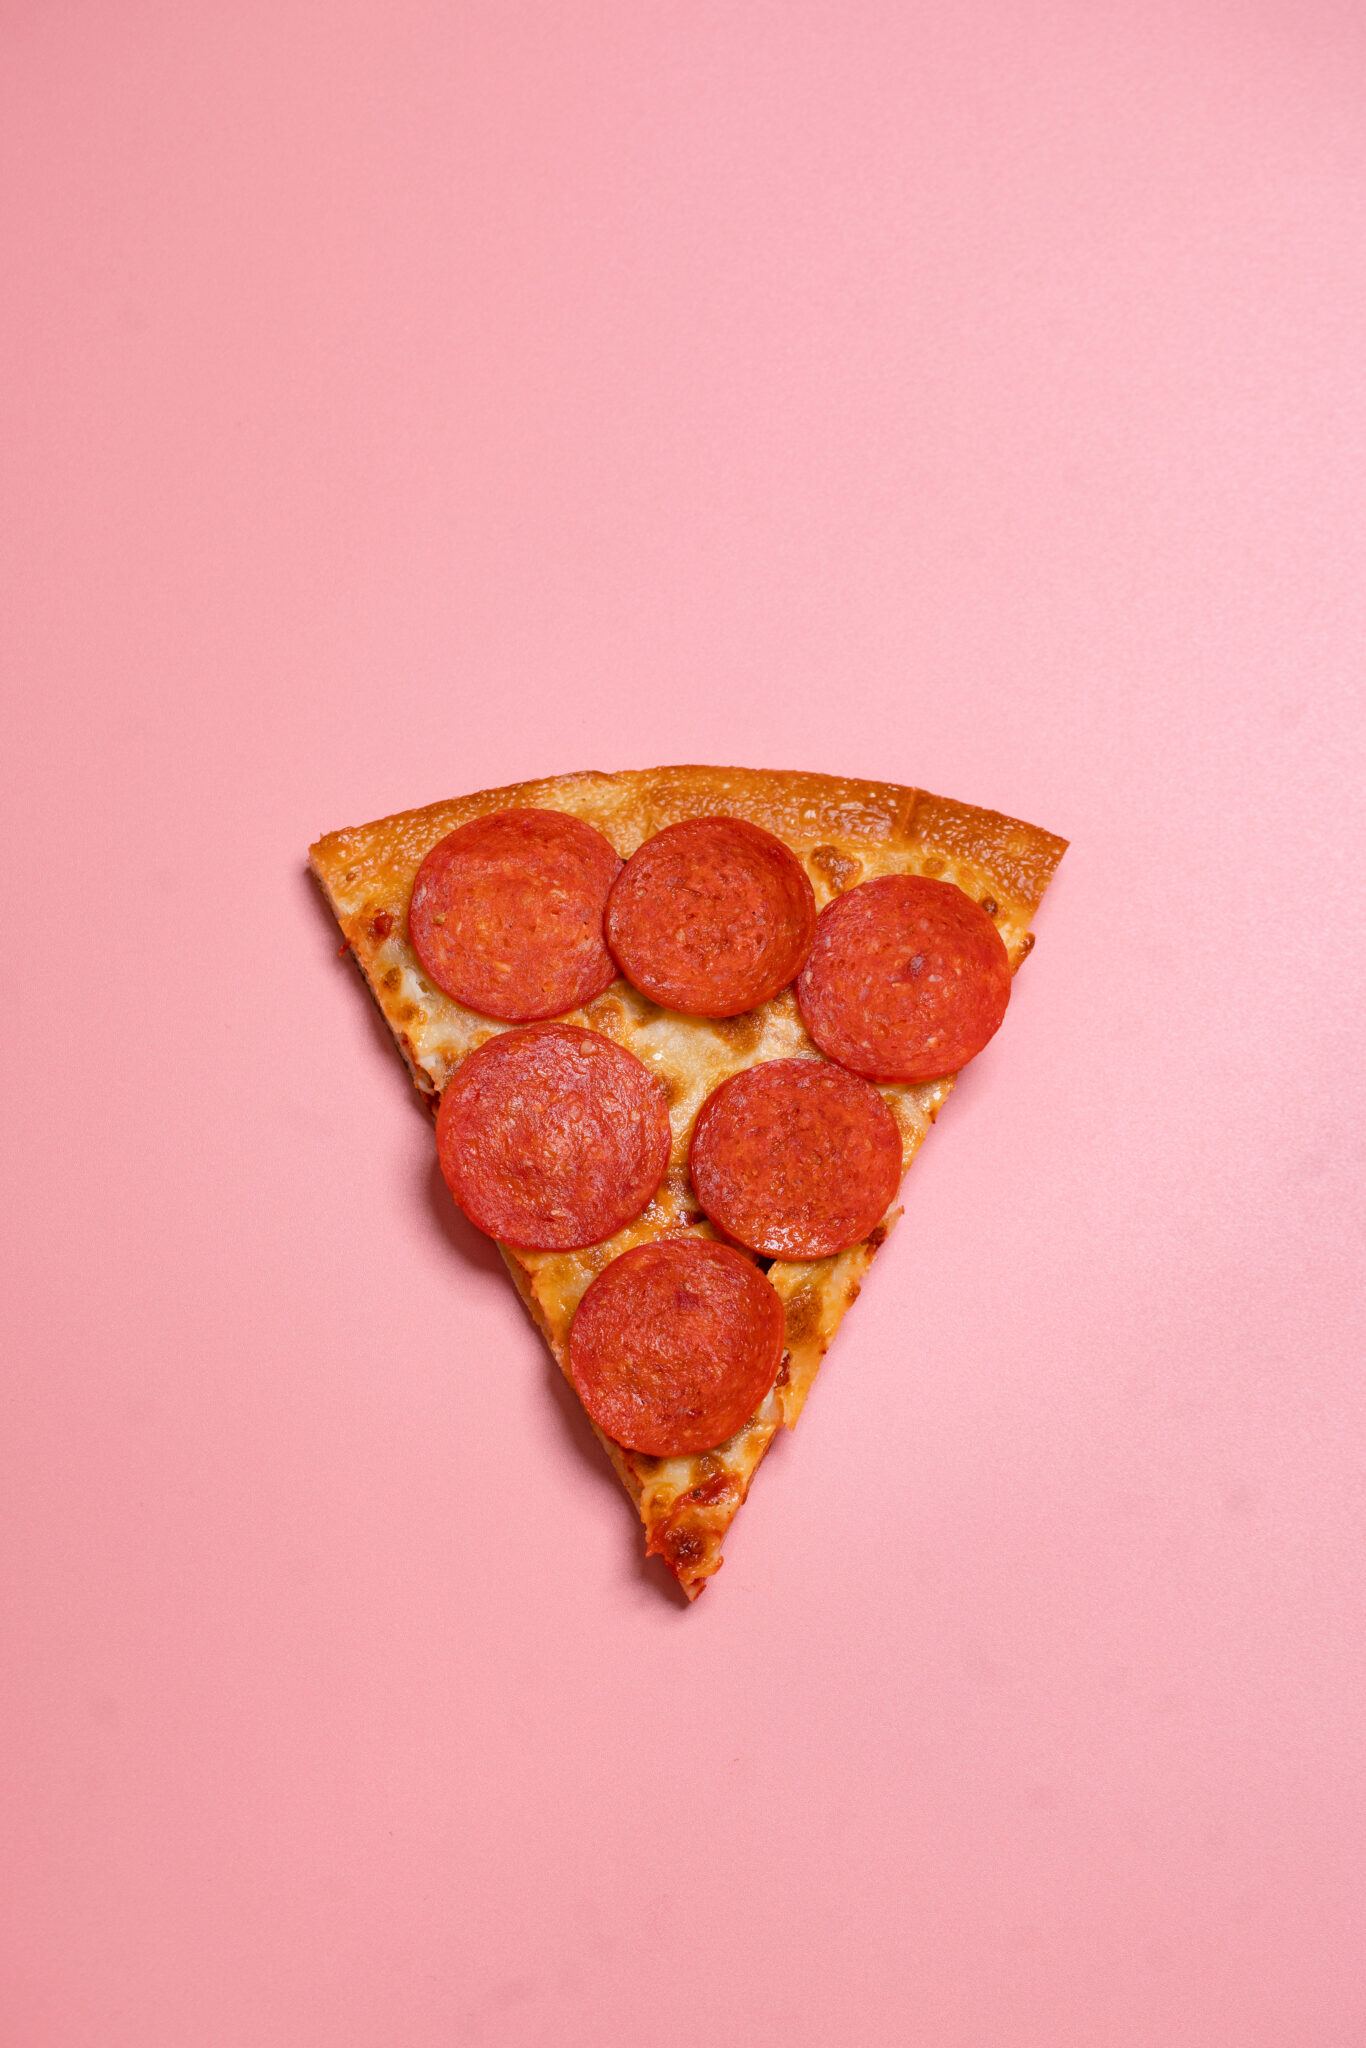 Commercial photo of slice of pizza against a pink background